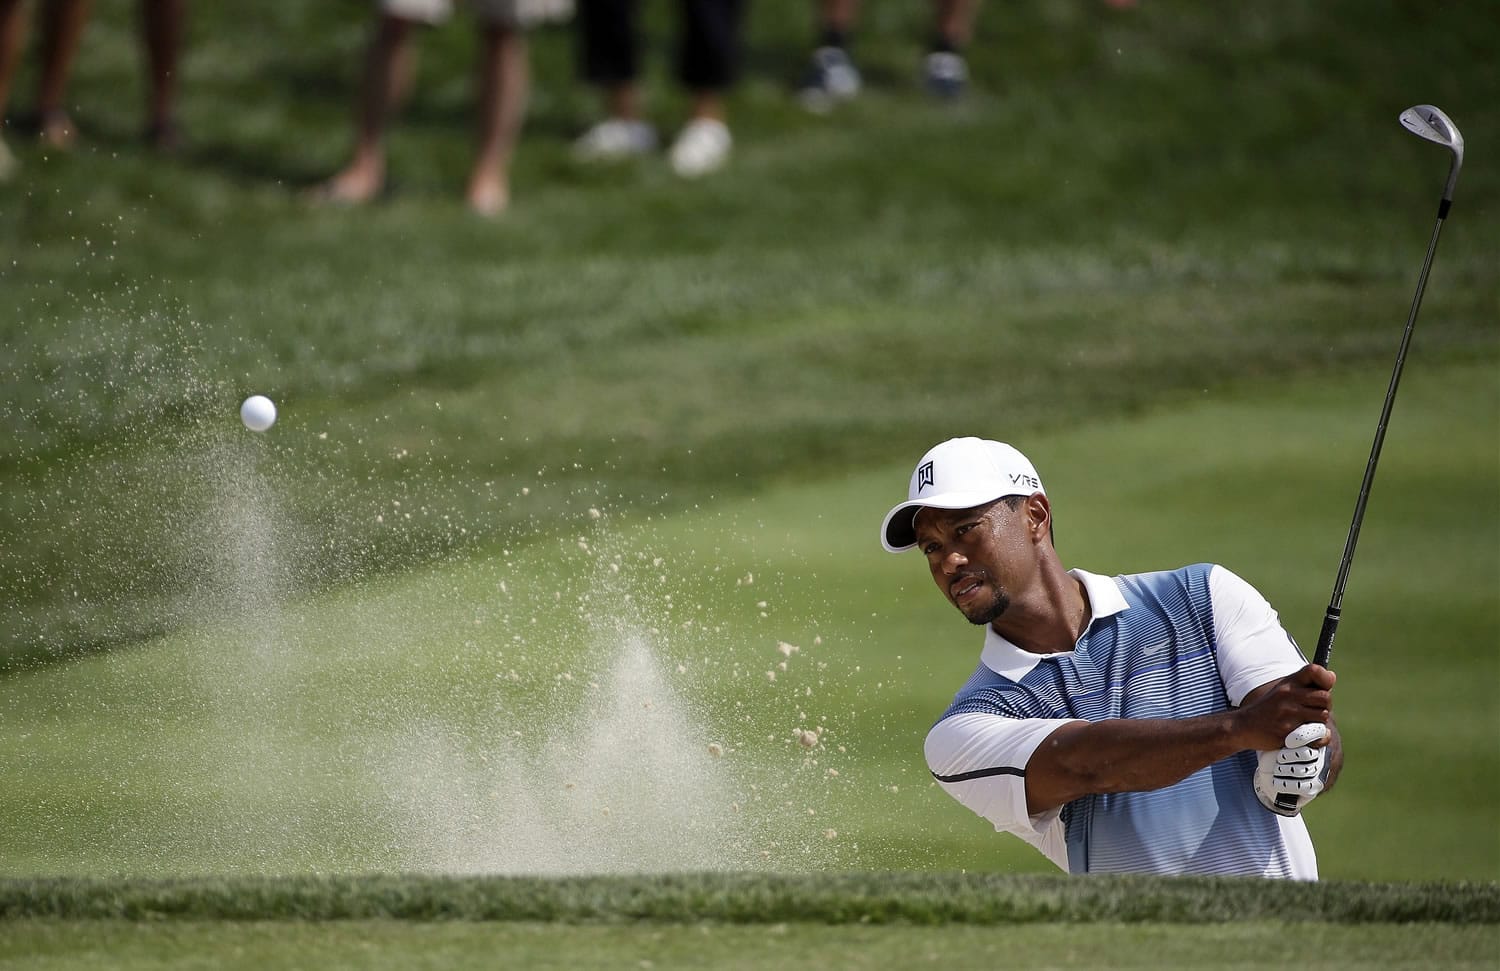 Tiger Woods hits out of the bunker on the seventh hole during a practice round for the PGA Championship golf tournament at Valhalla Golf Club on Wednesday, Aug. 6, 2014, in Louisville, Ky. The tournament is set to begin on Thursday. (AP Photo/David J.